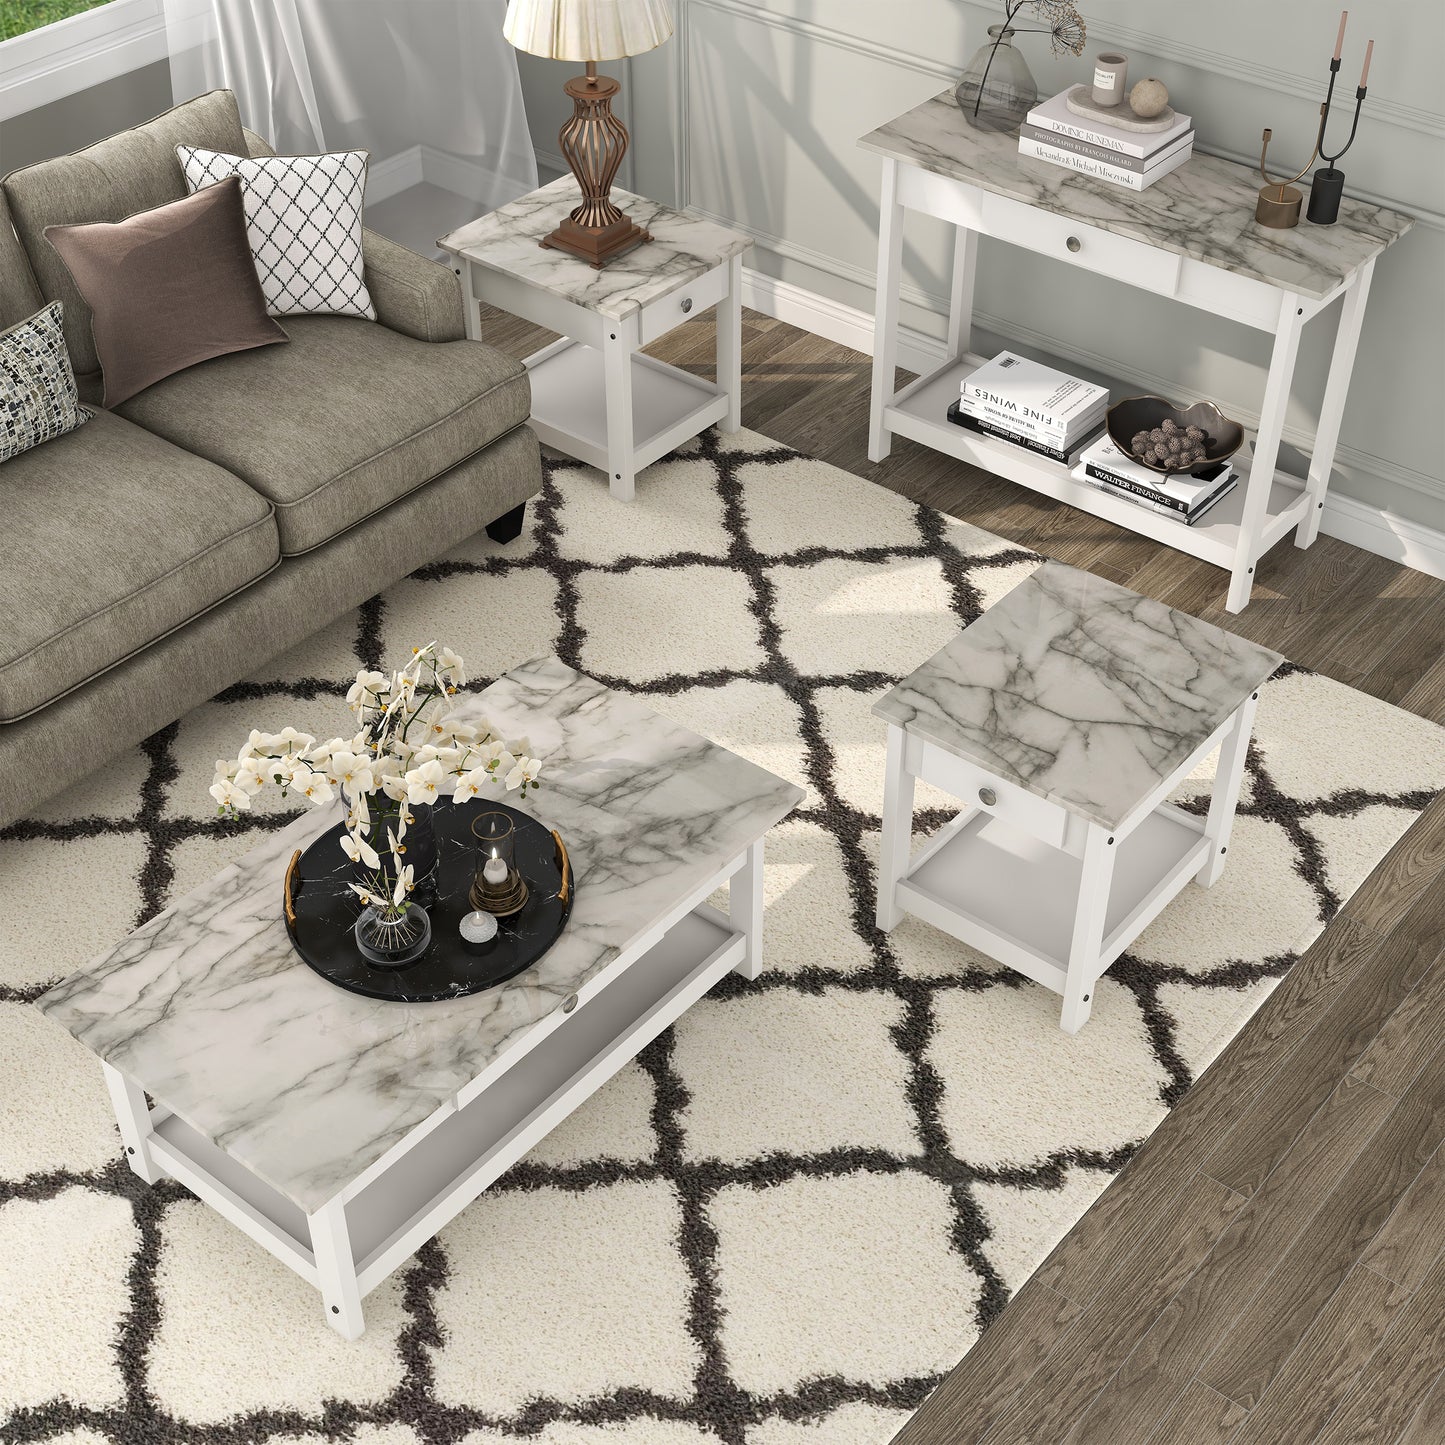 Right angled bird's eye view of a four-piece modern white and faux marble coffee table set with lower shelves in a living area with accessories